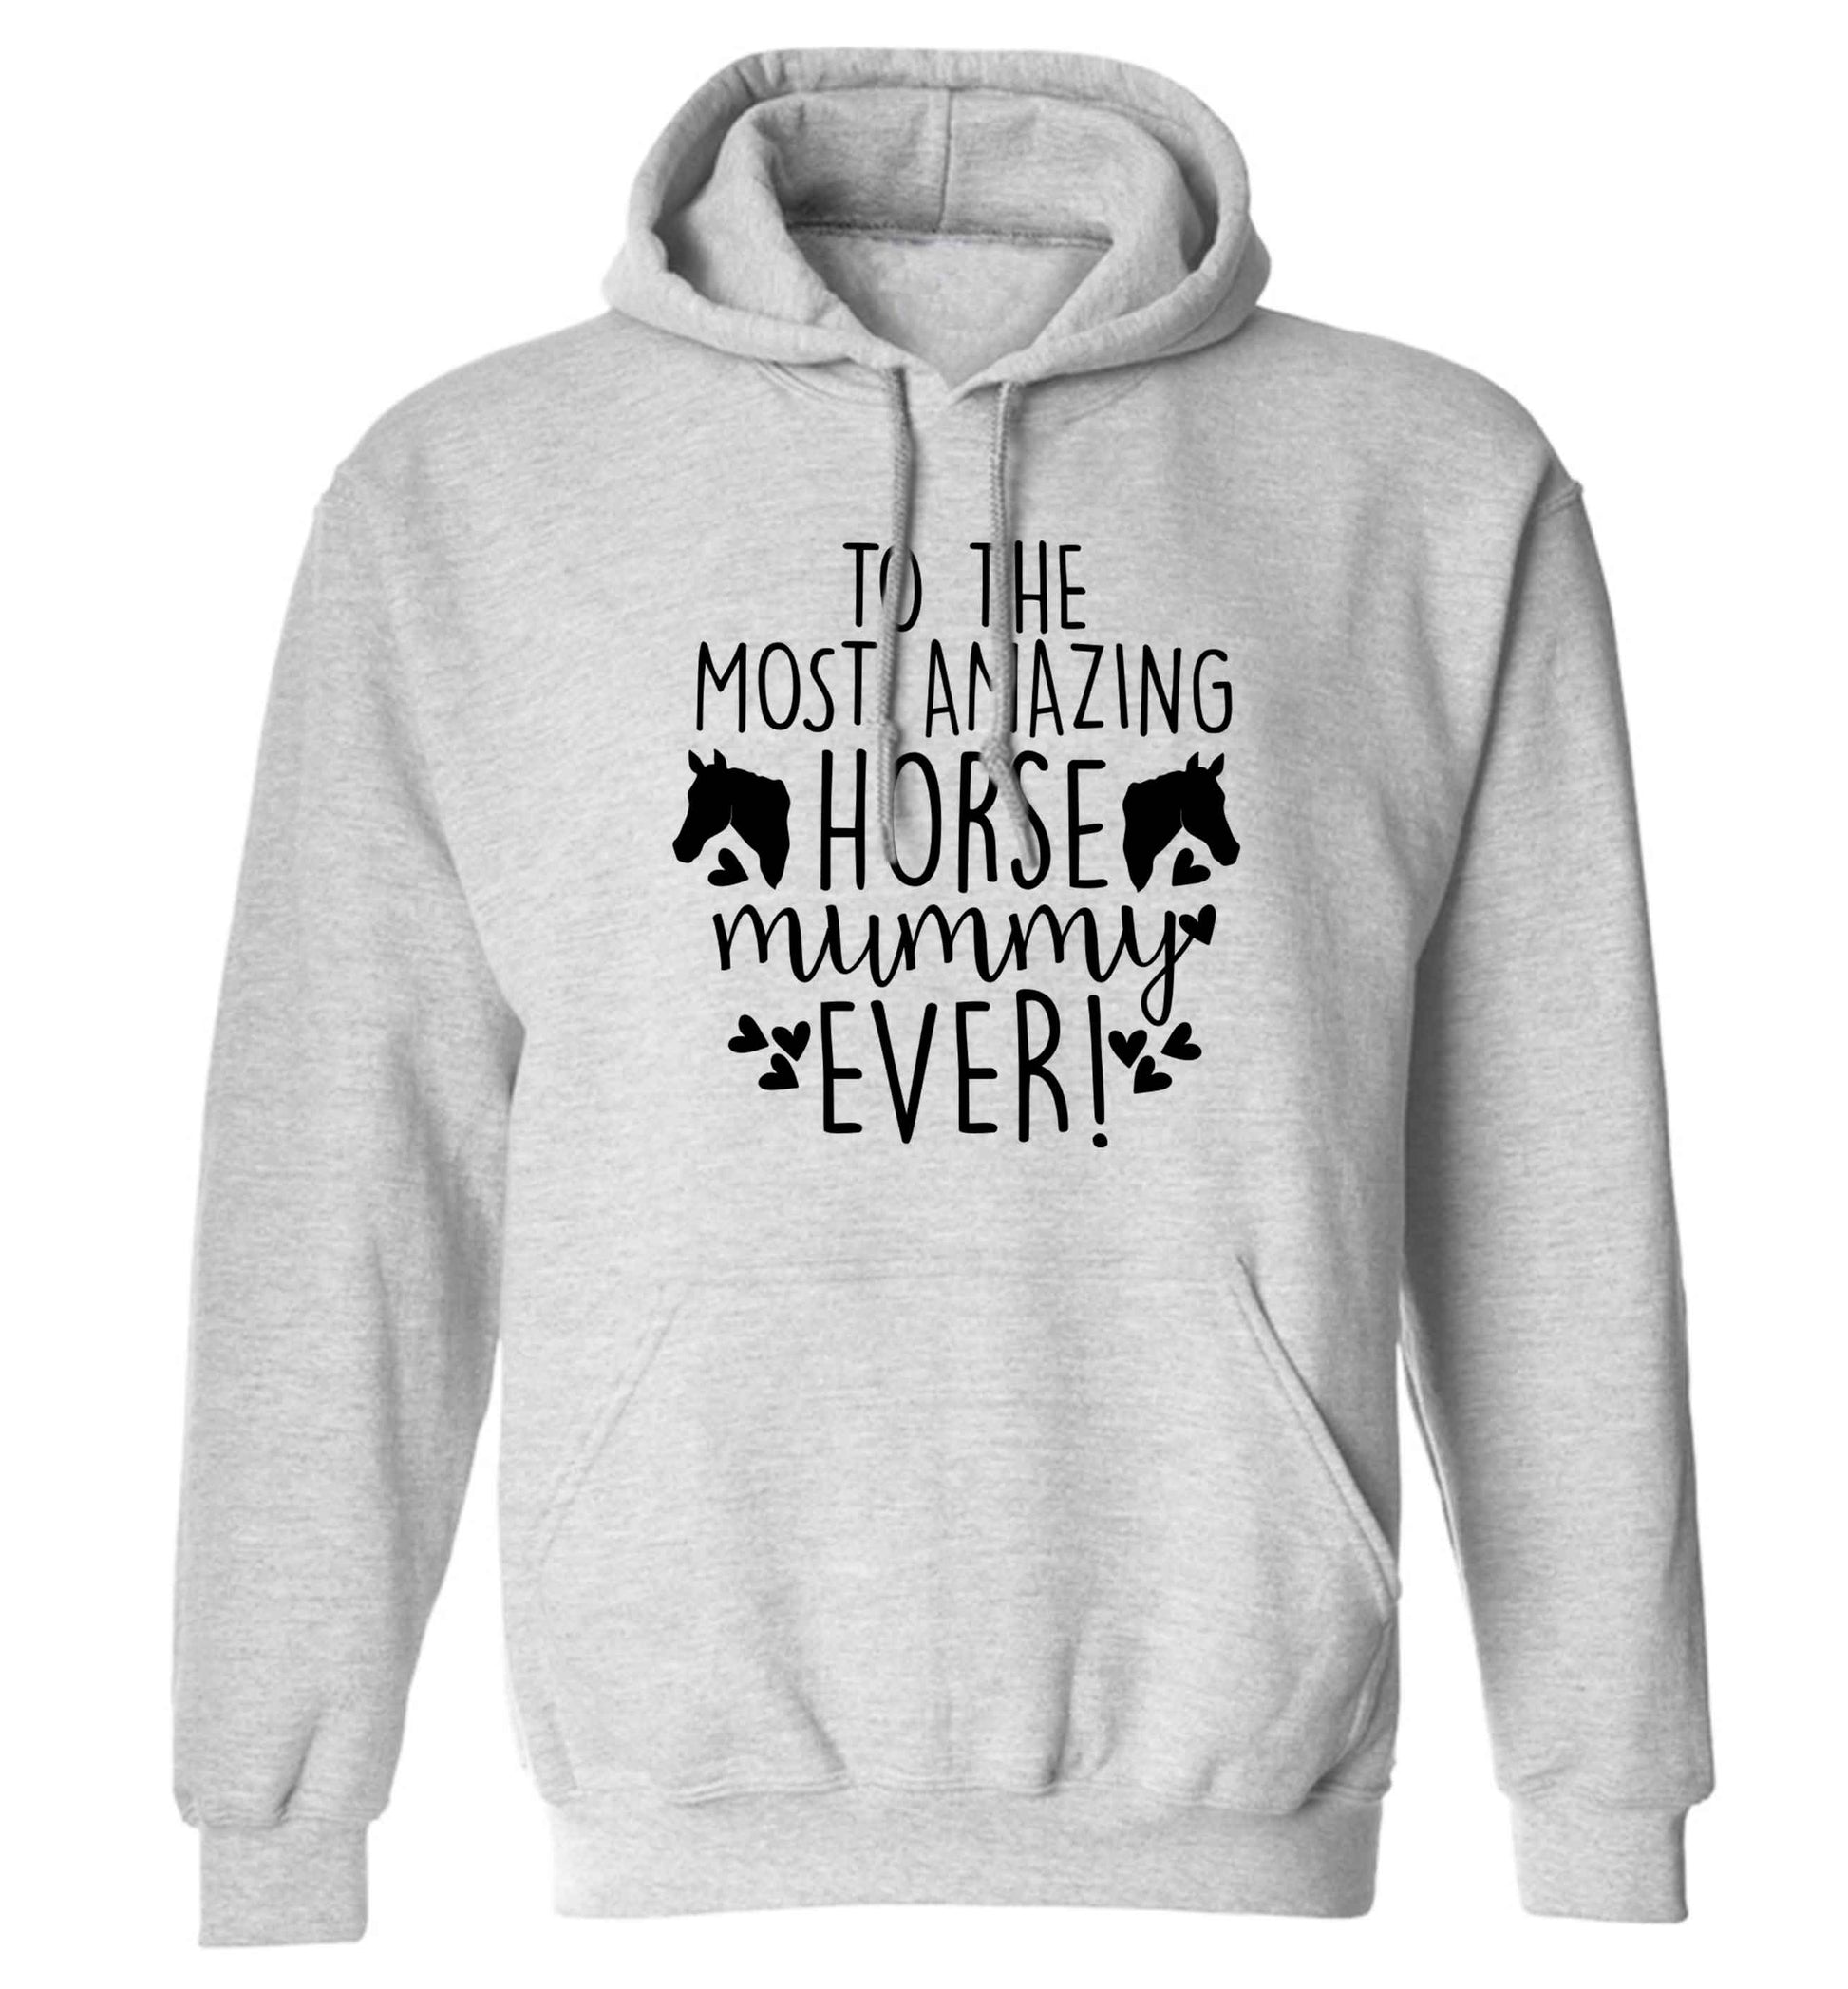 To the most amazing horse mummy ever! adults unisex grey hoodie 2XL